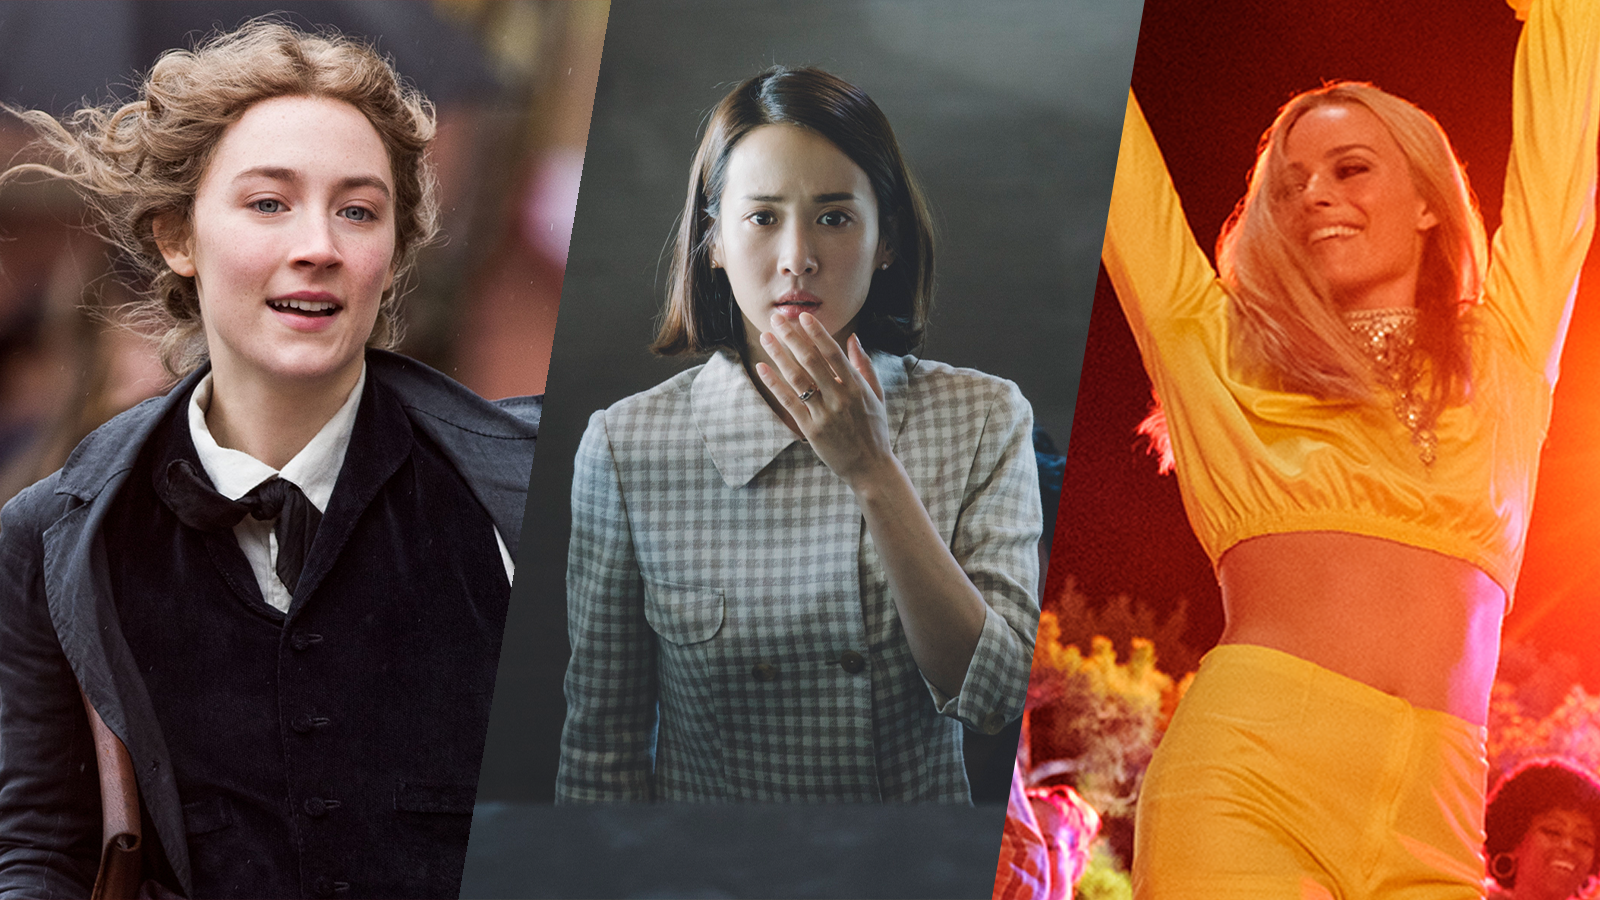 Our Top 10 Films of 2019